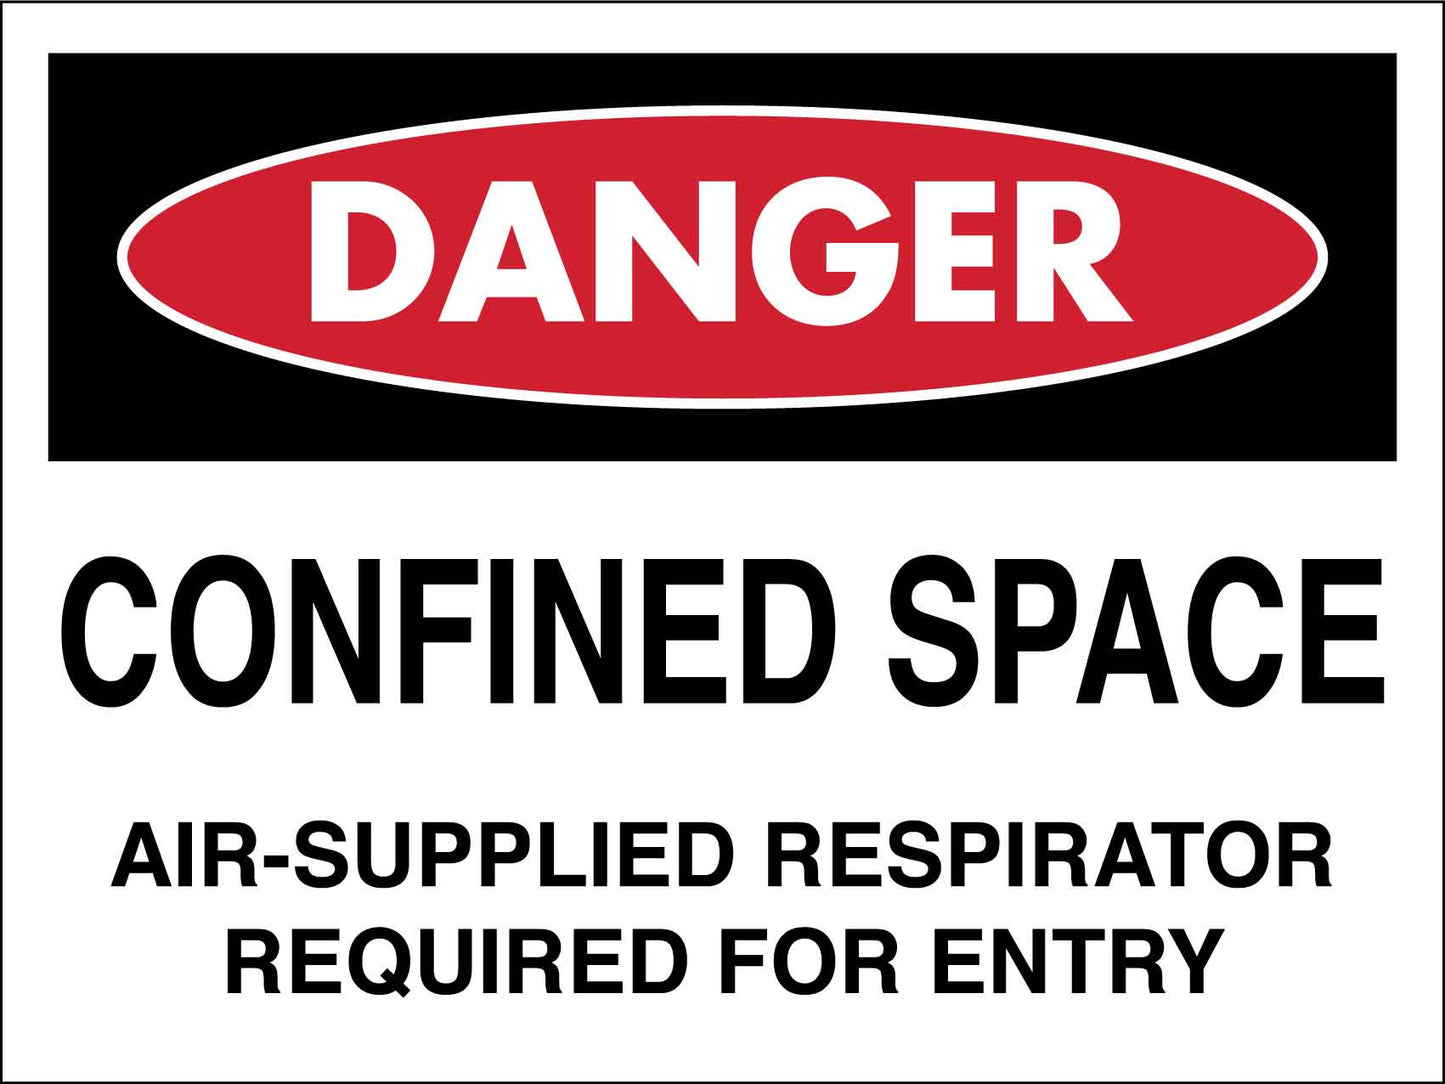 Danger Confined Space Air-Supplied Respirator Required Sign